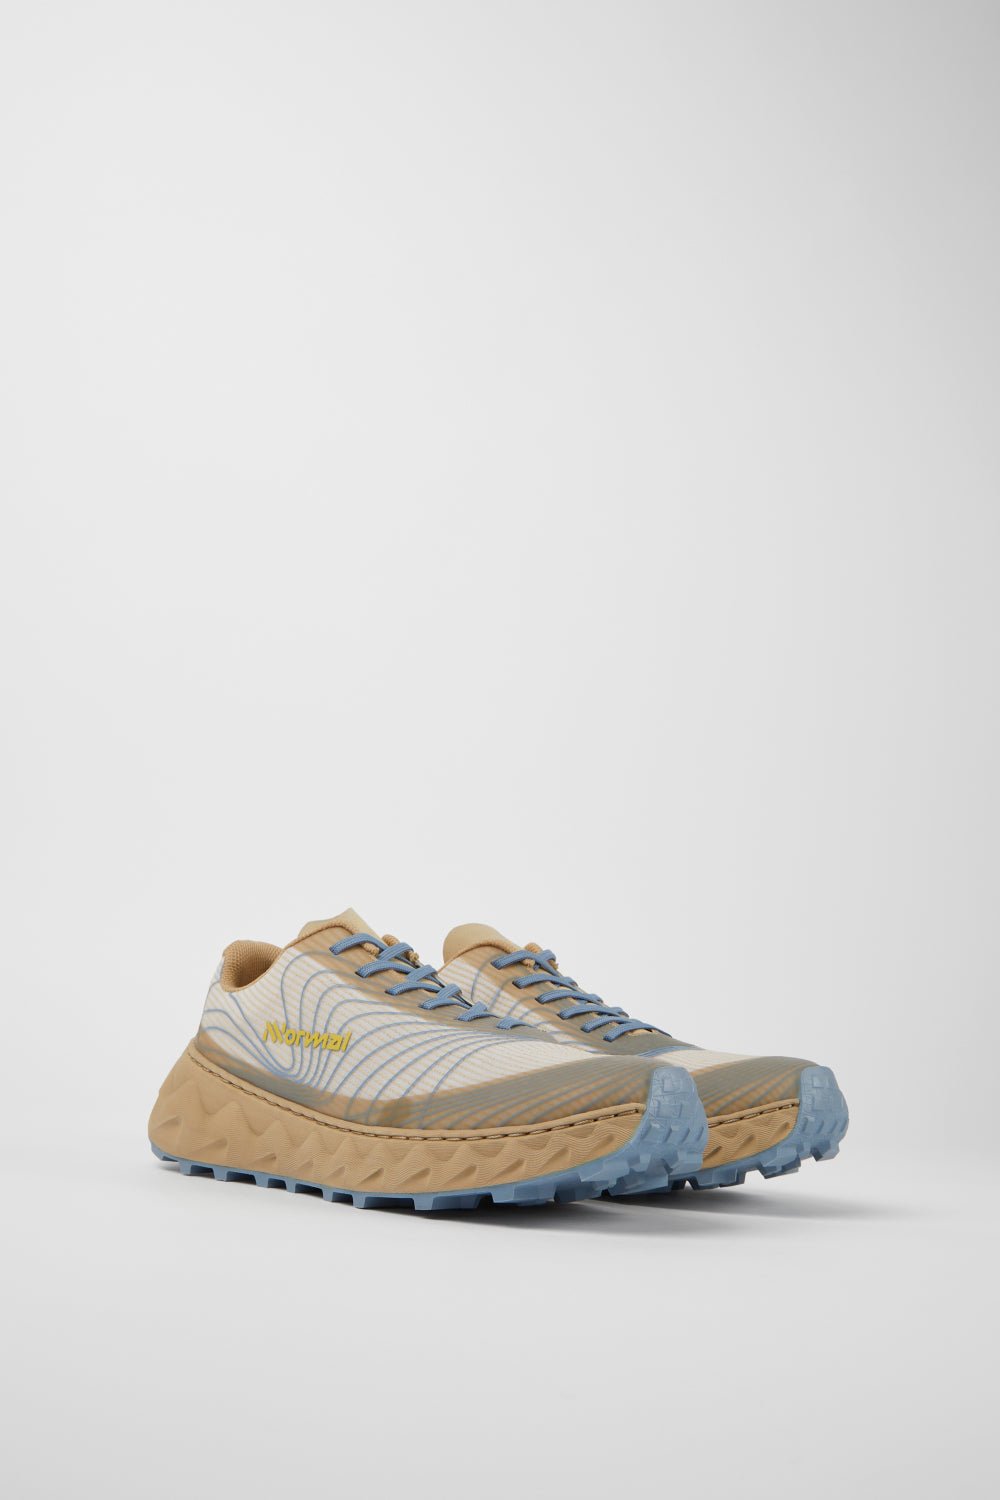 Nnormal Tomir Shoe - Sand/Blue | Coffee Outdoors